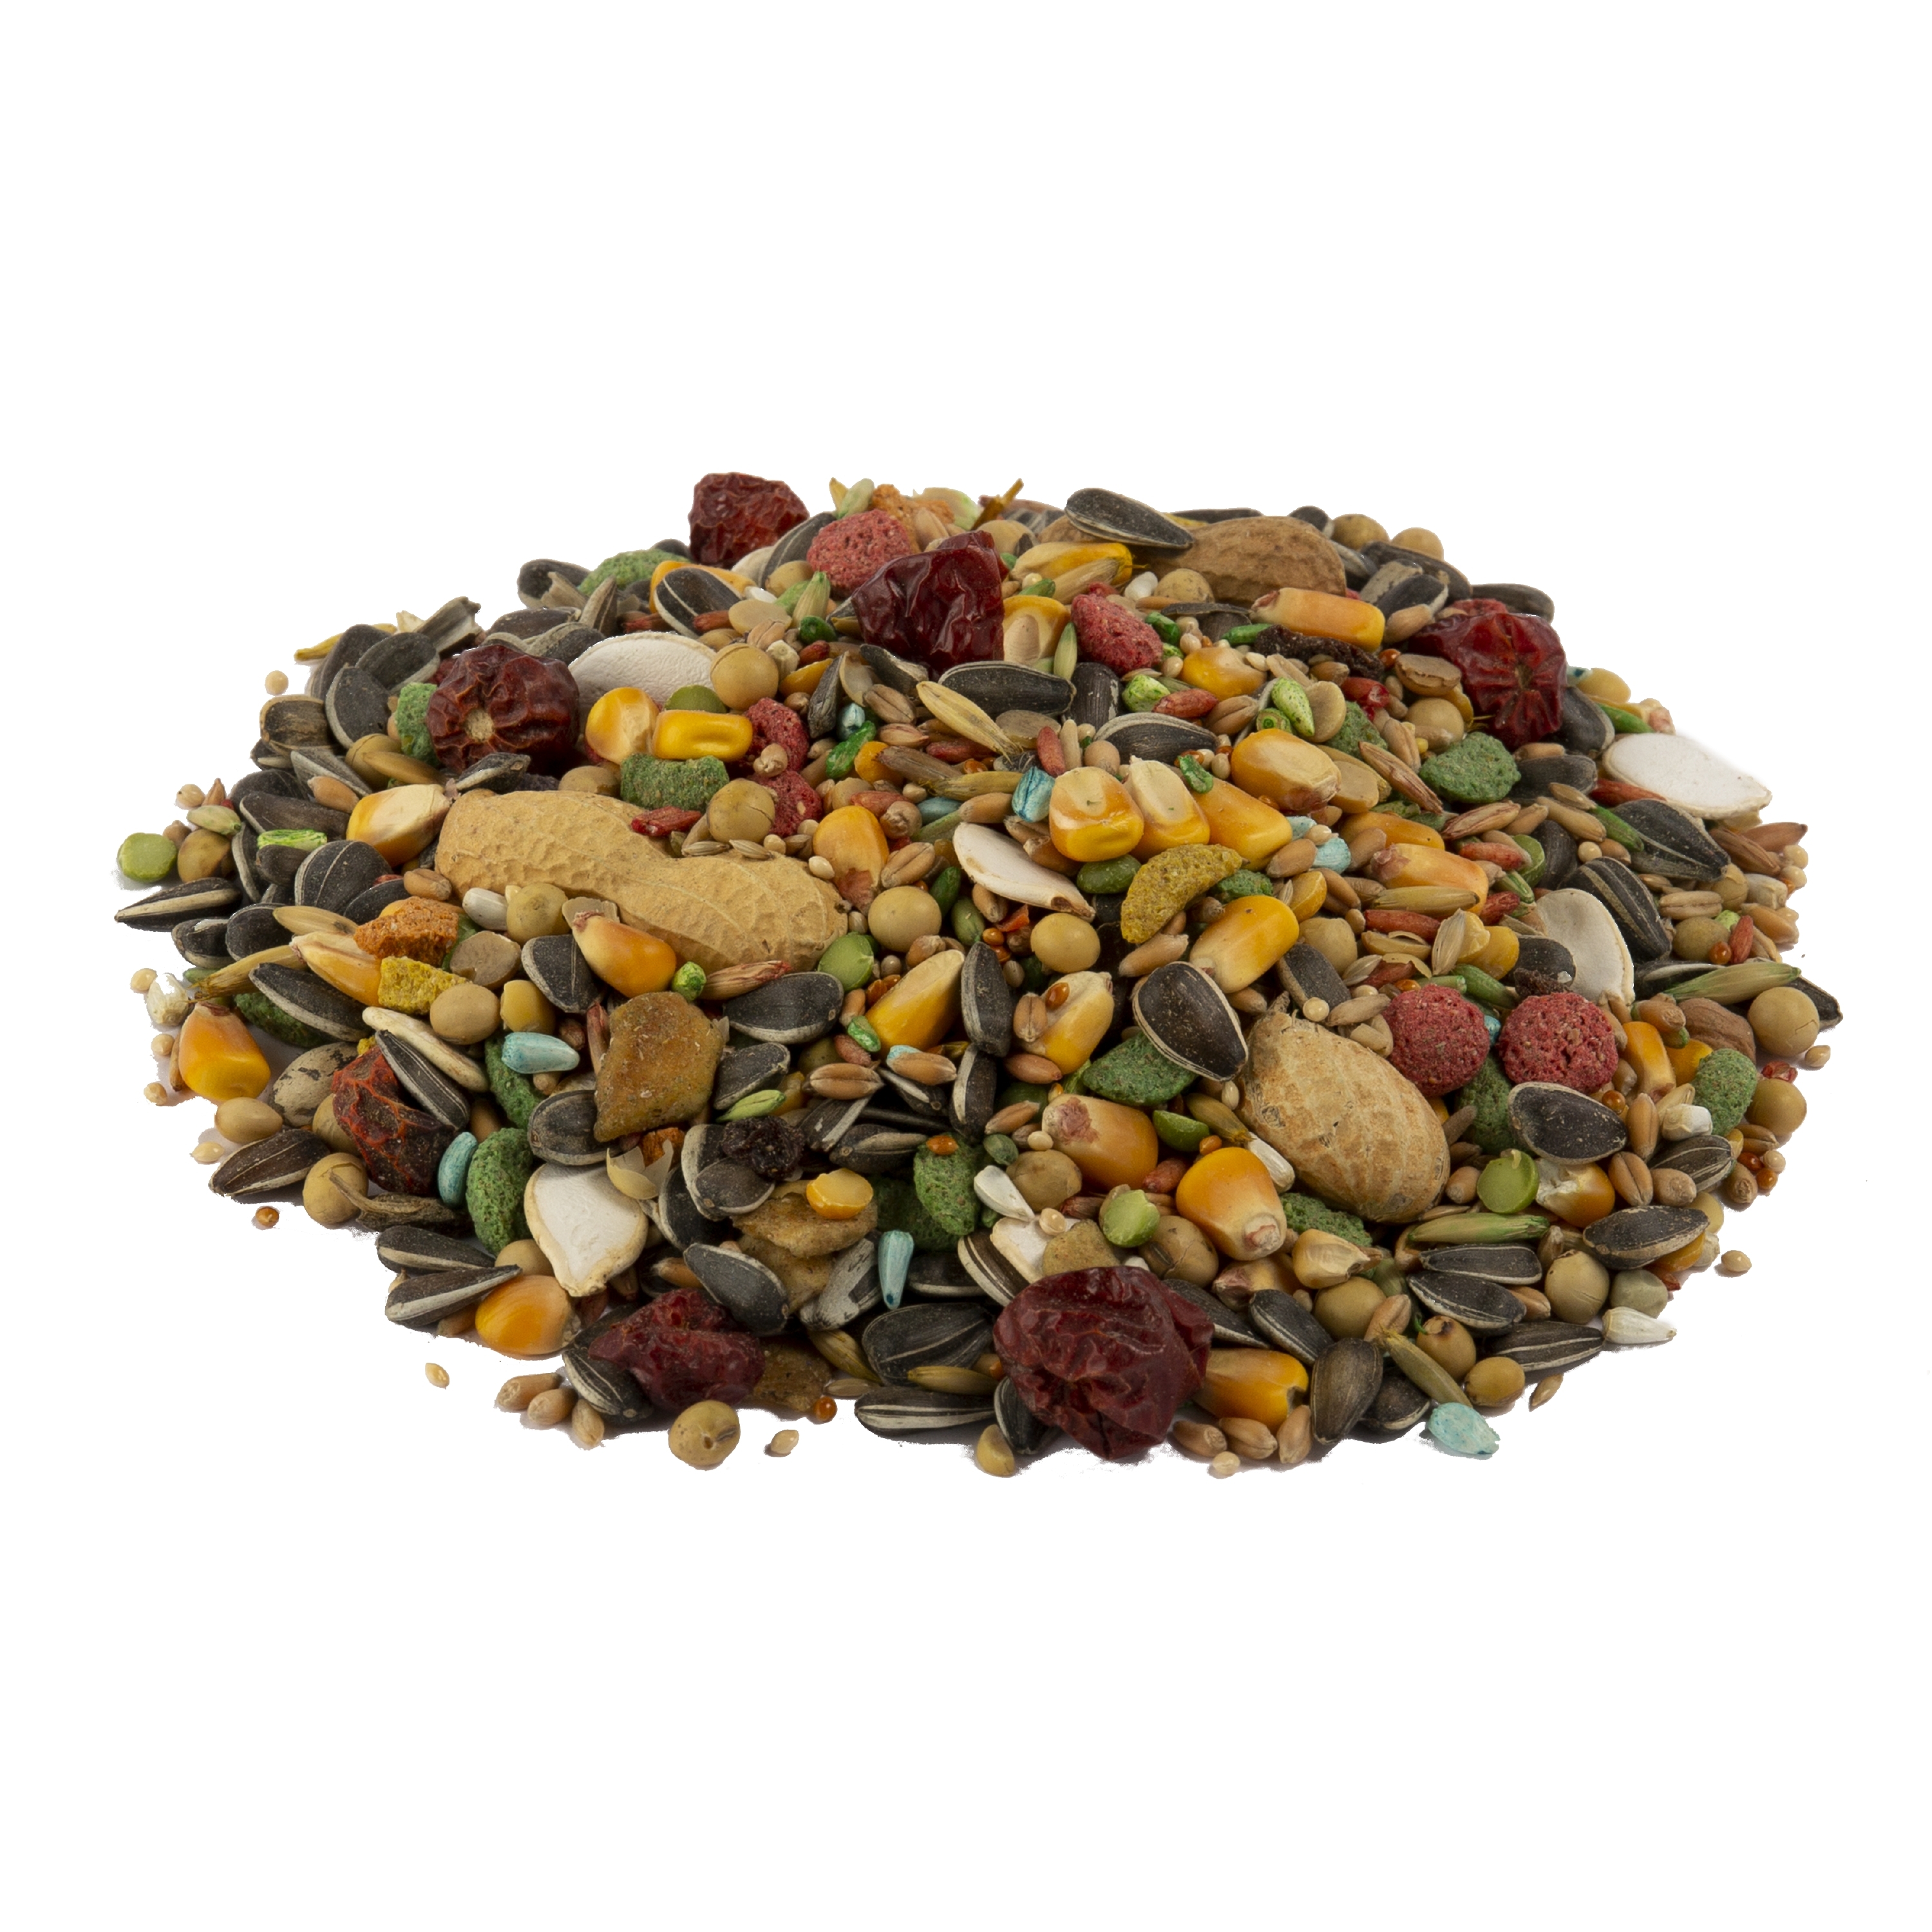 Wild Harvest Parrot Advanced Nutrition Diet Dry Bird Food, 8 lbs - image 3 of 4